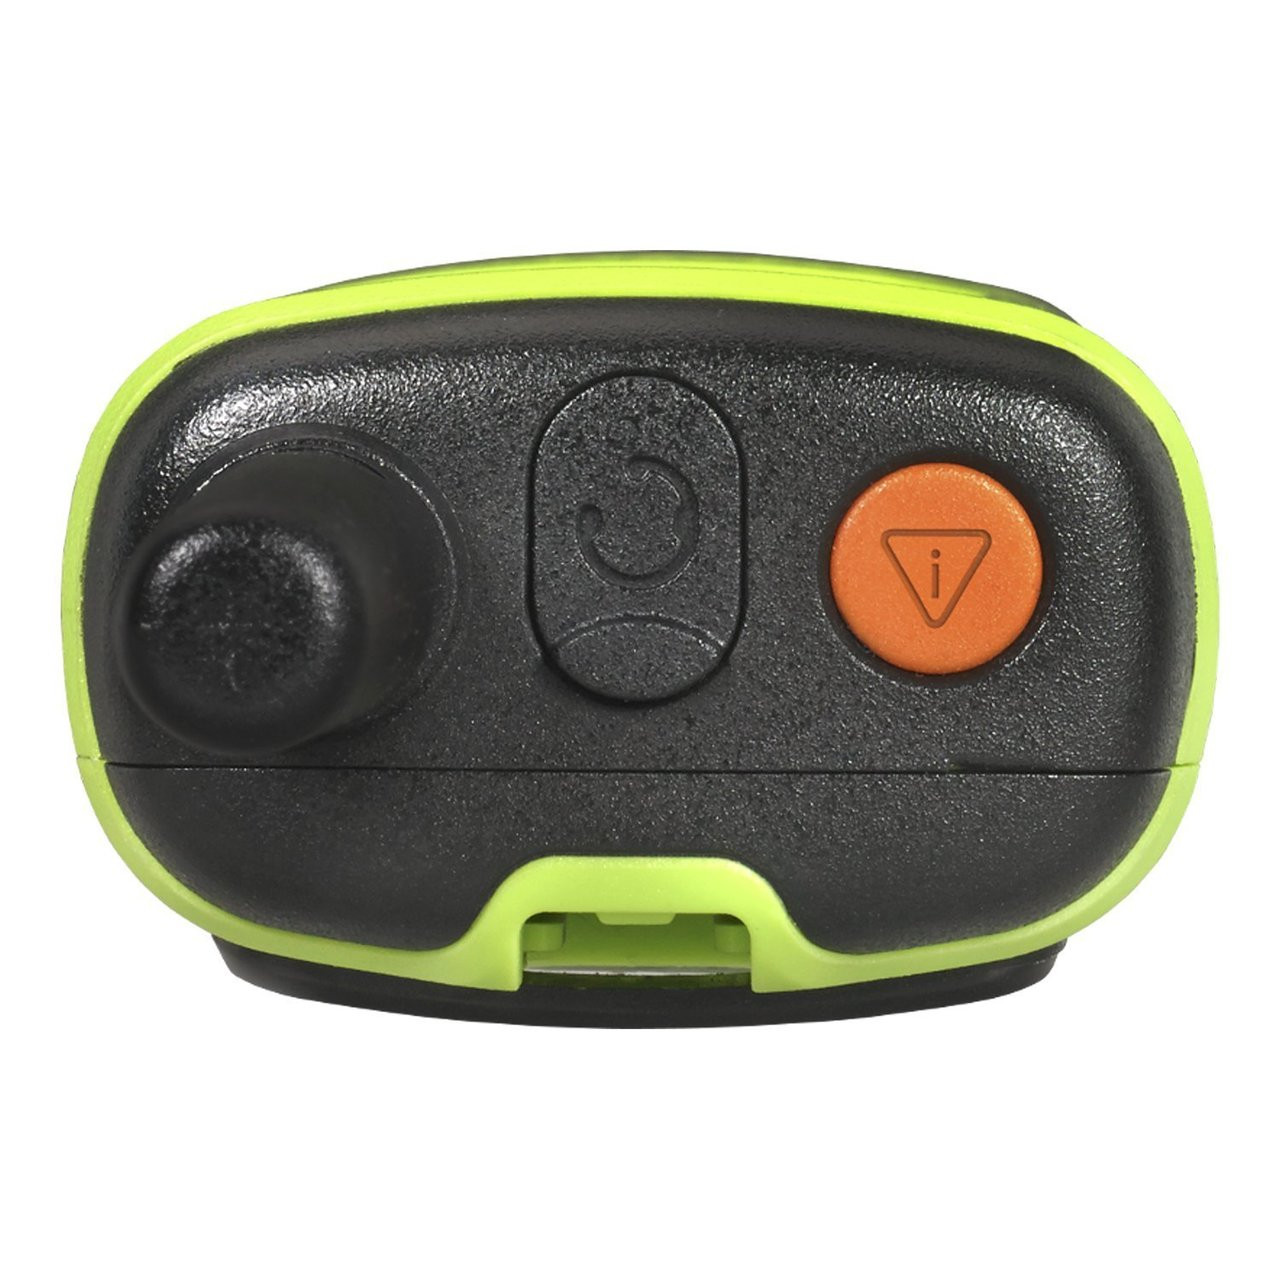 The Motorola T600 Walkie Talkie includes a belt clip with an integrated whistle